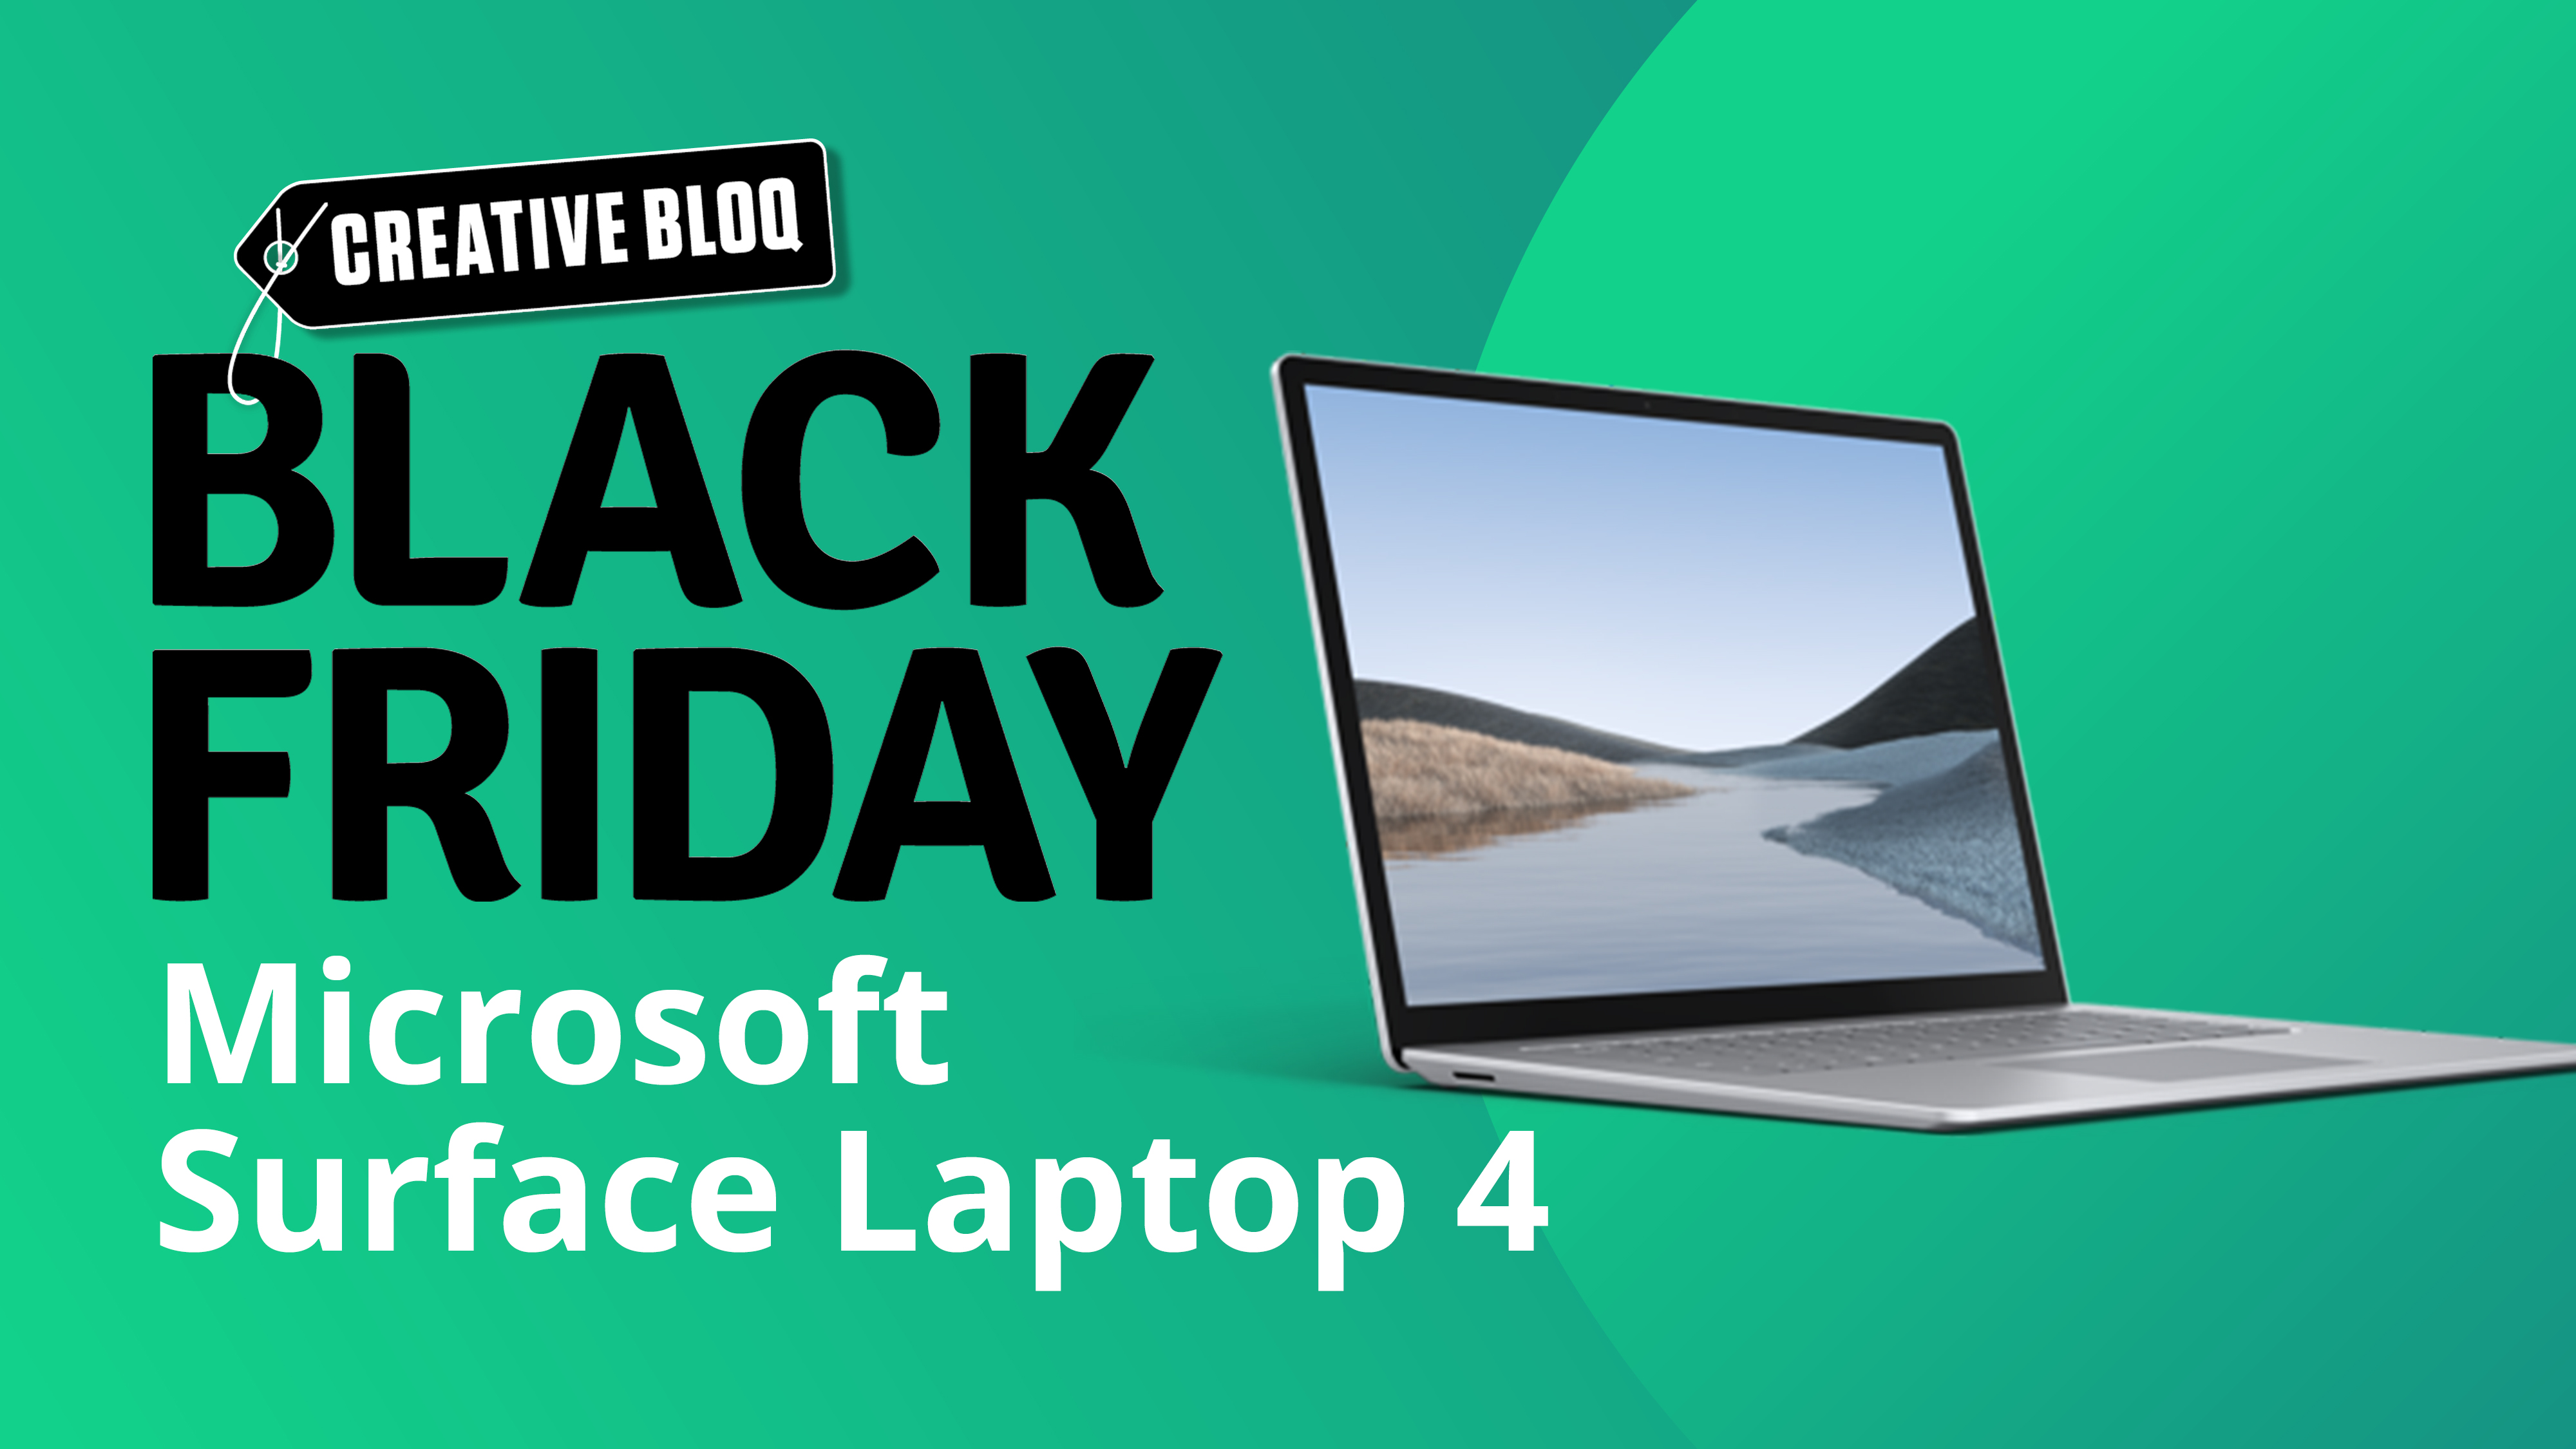 Image of a Black Friday Microsoft Surface deal with a Microsoft Surface Laptop 4 on a green background